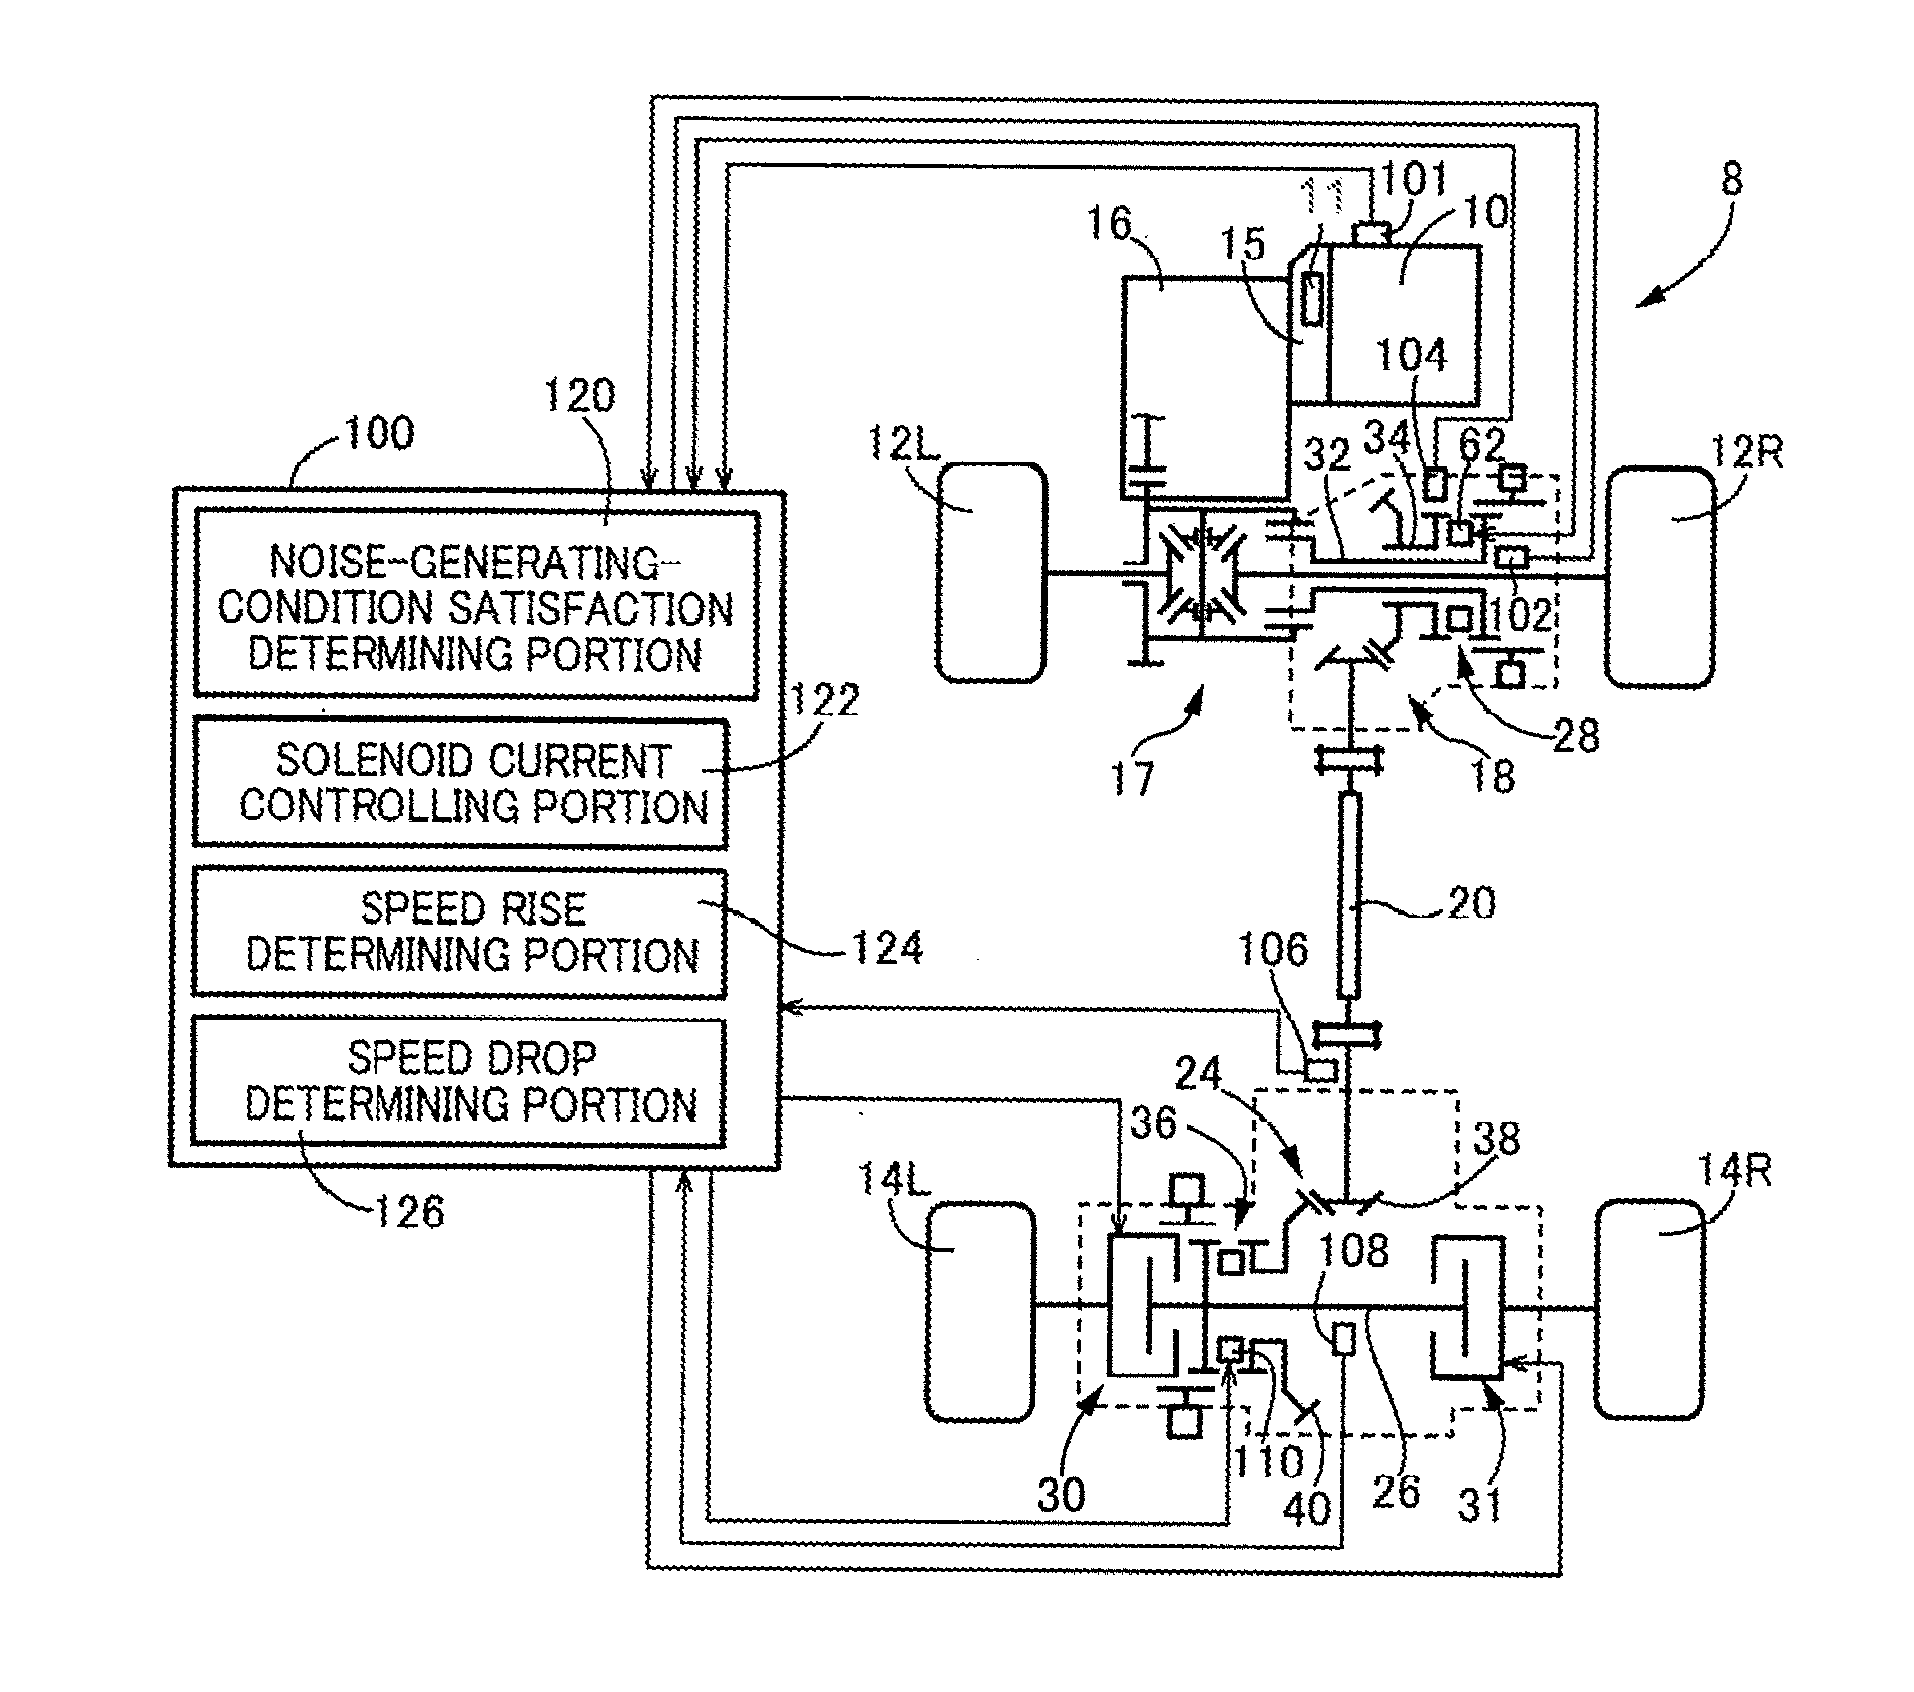 Control apparatus for a vehicular 4-wheel drive system